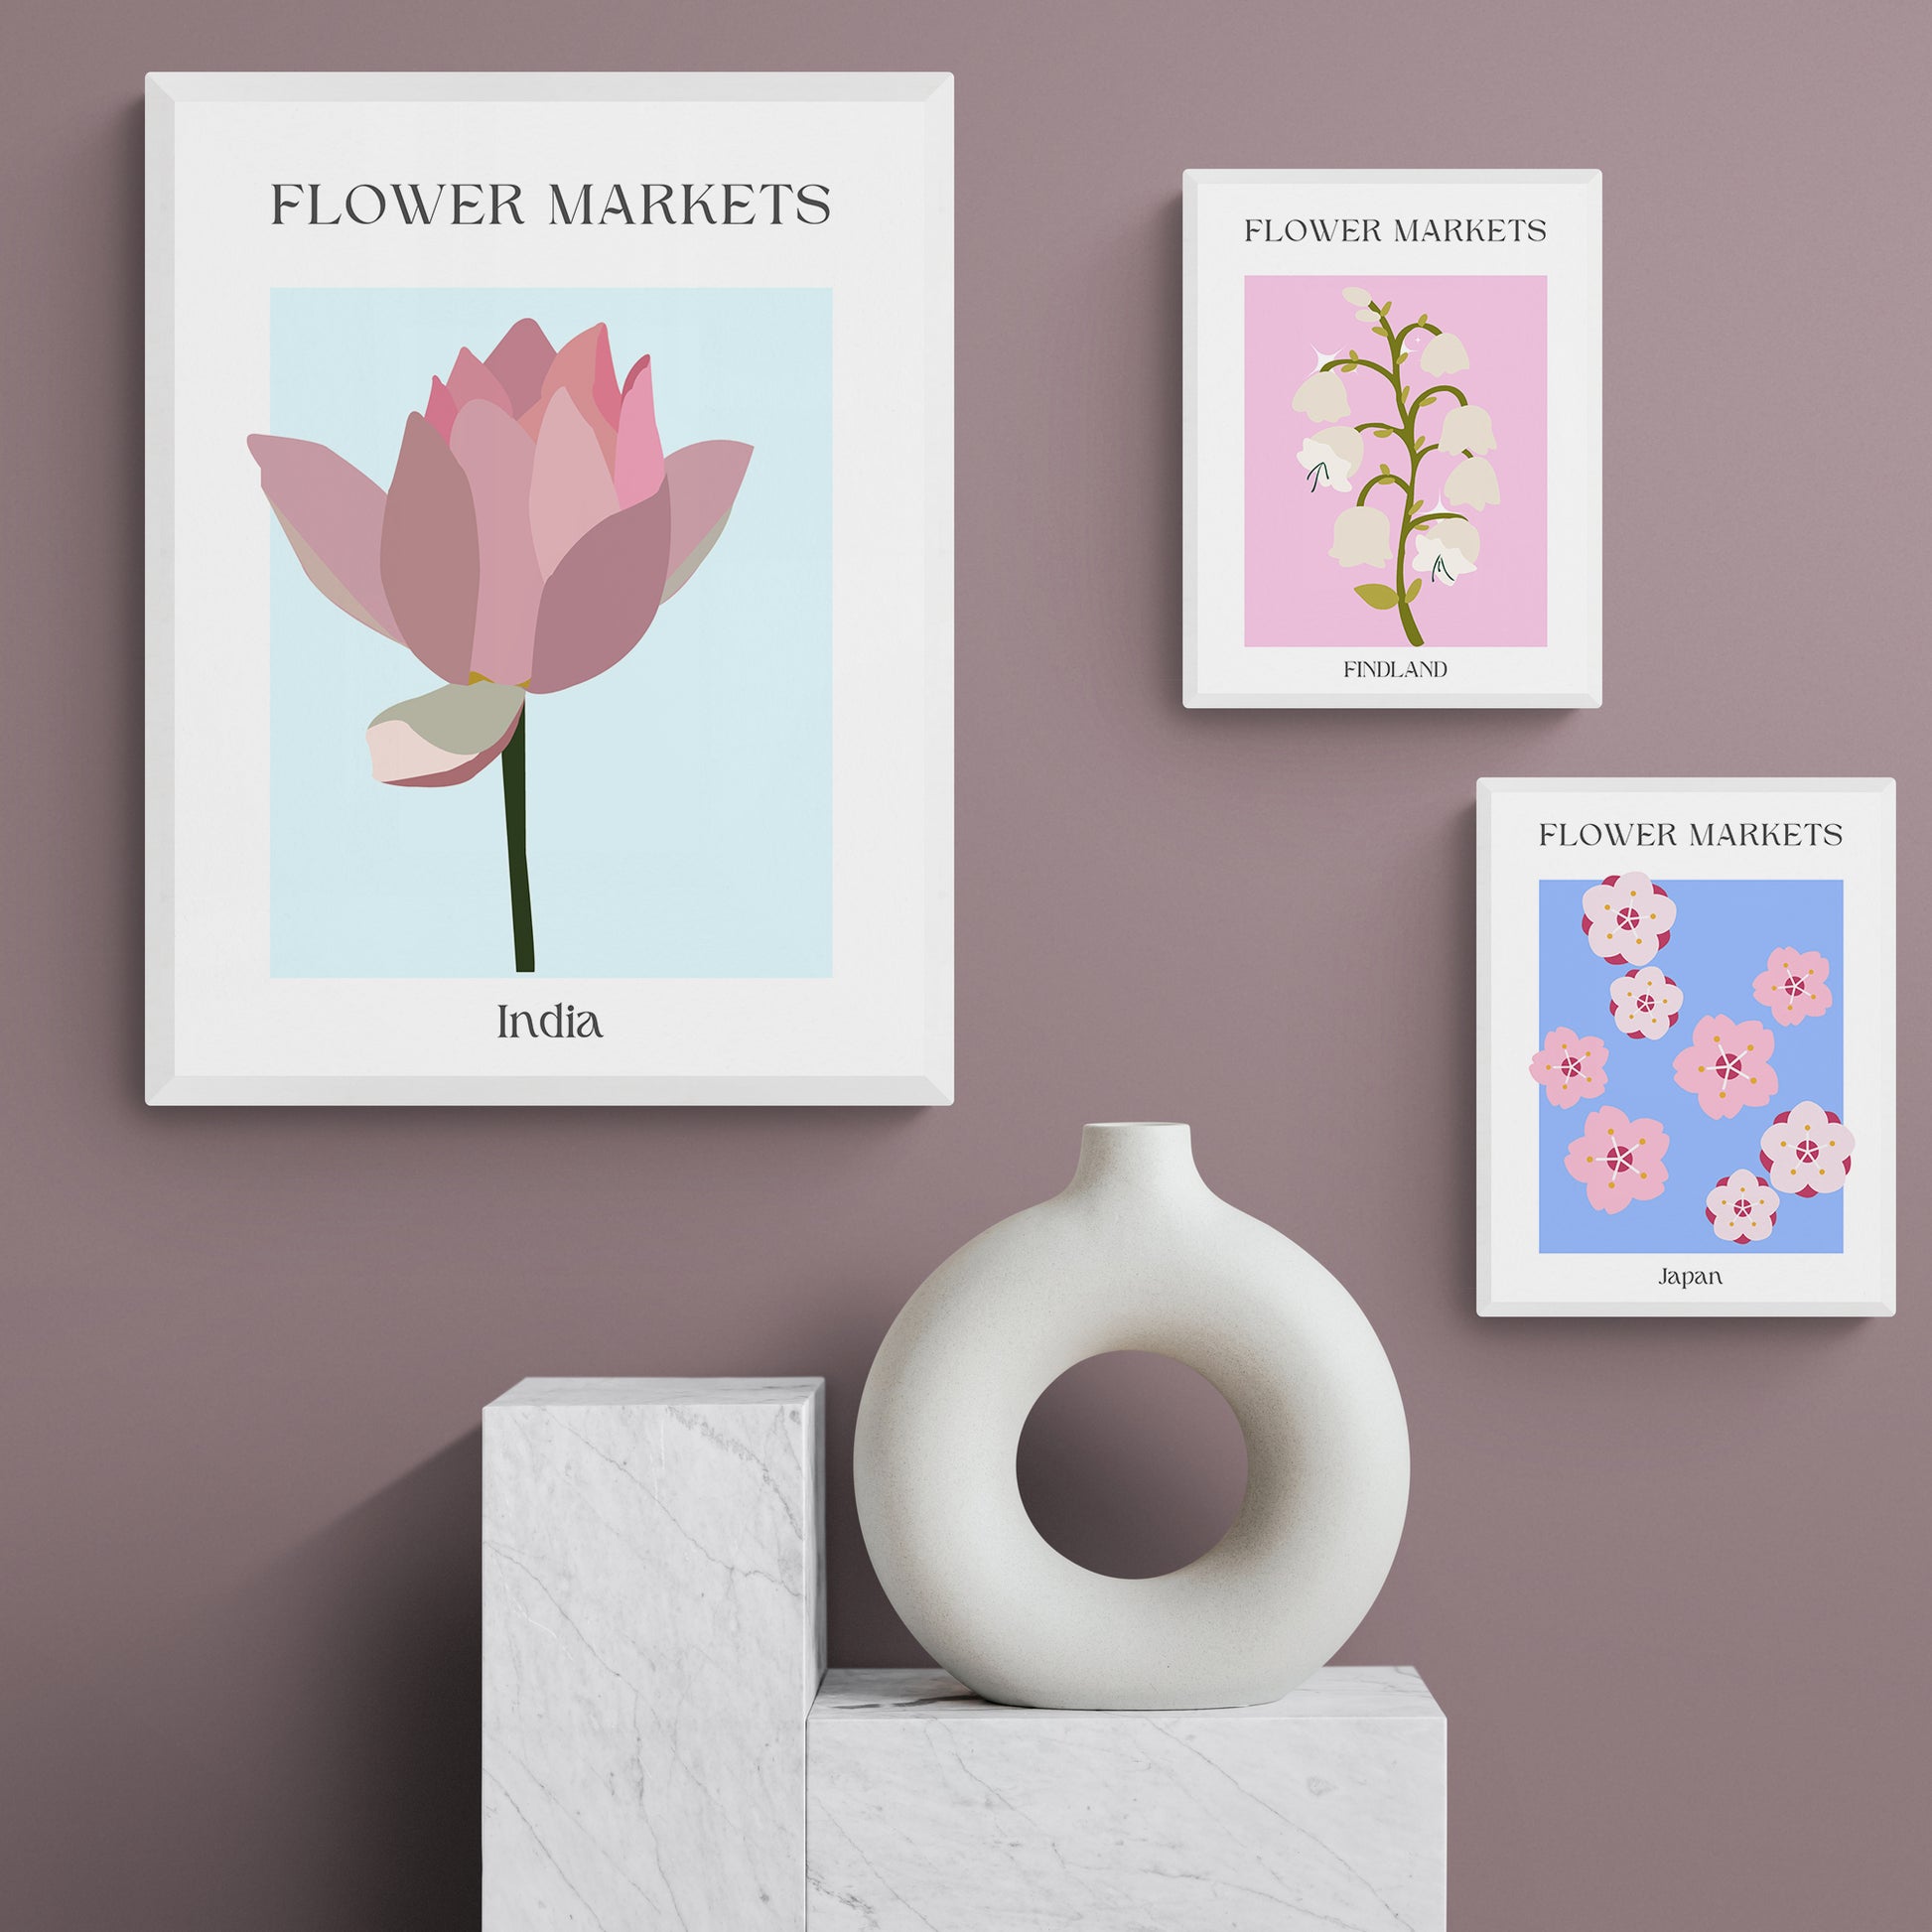 This Mexico Flowers Market Print features a vivid mix of pastel colors and bold designs showcasing native flowers. With a variety of 98 types of prints, shapes in color, and abstract flowers, this gallery wall inspiration is sure to brighten up any room with its Danish pastel style. Perfect for Art Deco and Matisse art, add a vibrant touch to your space with this flower market poster.